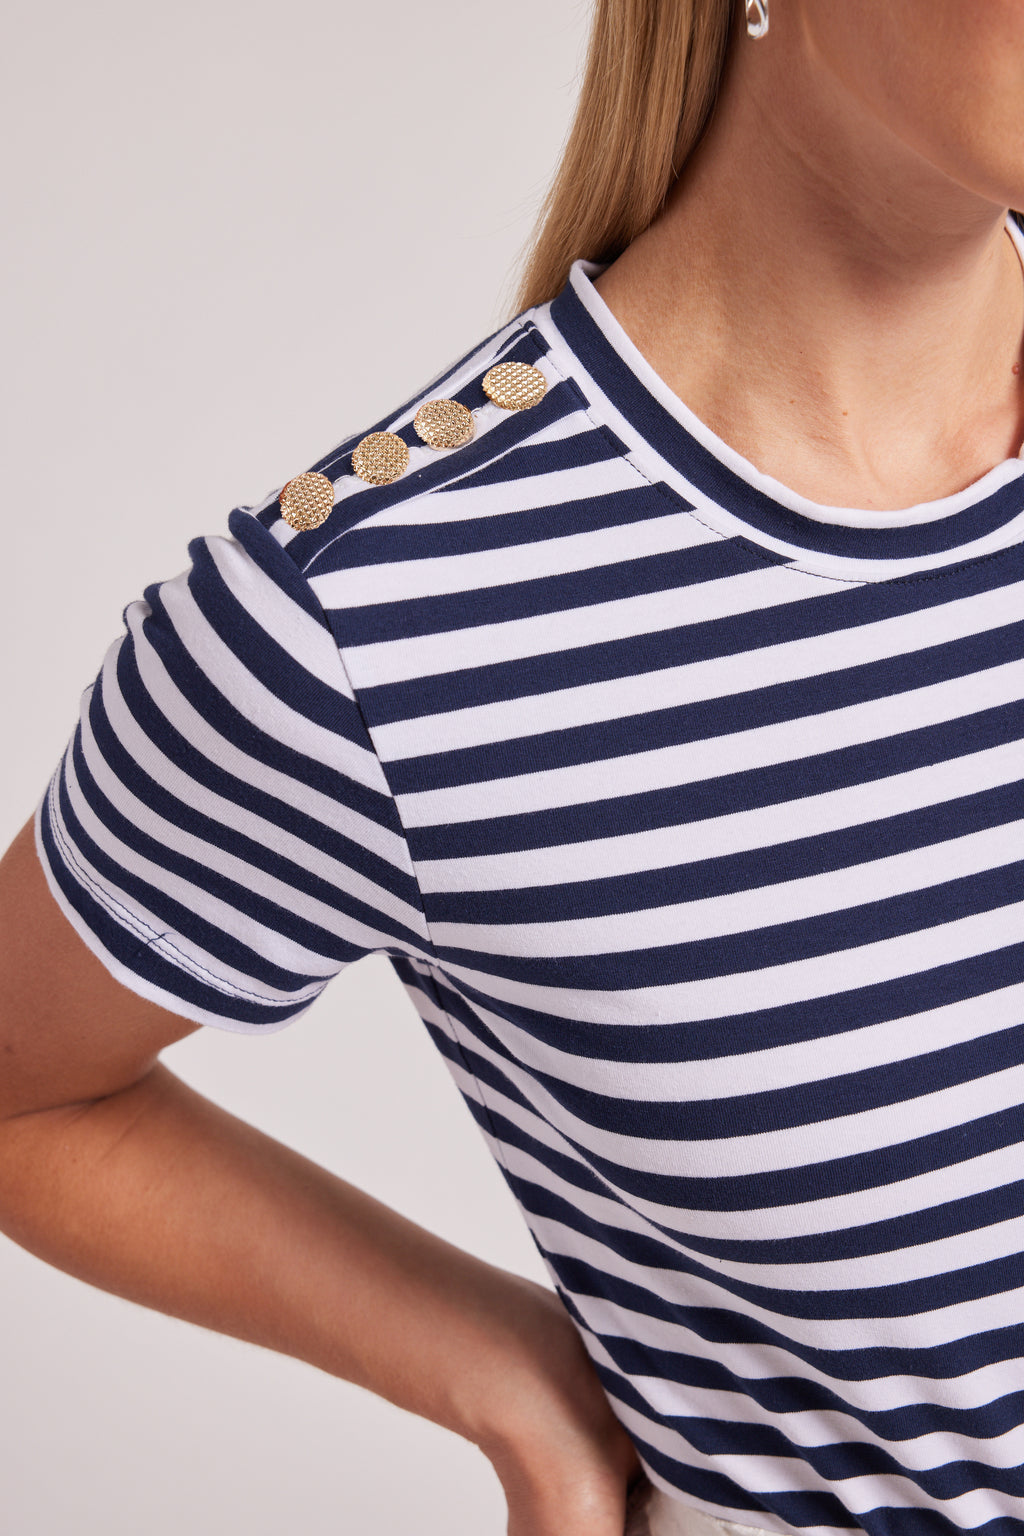 Generation Love Rina Striped Top in Navy/White